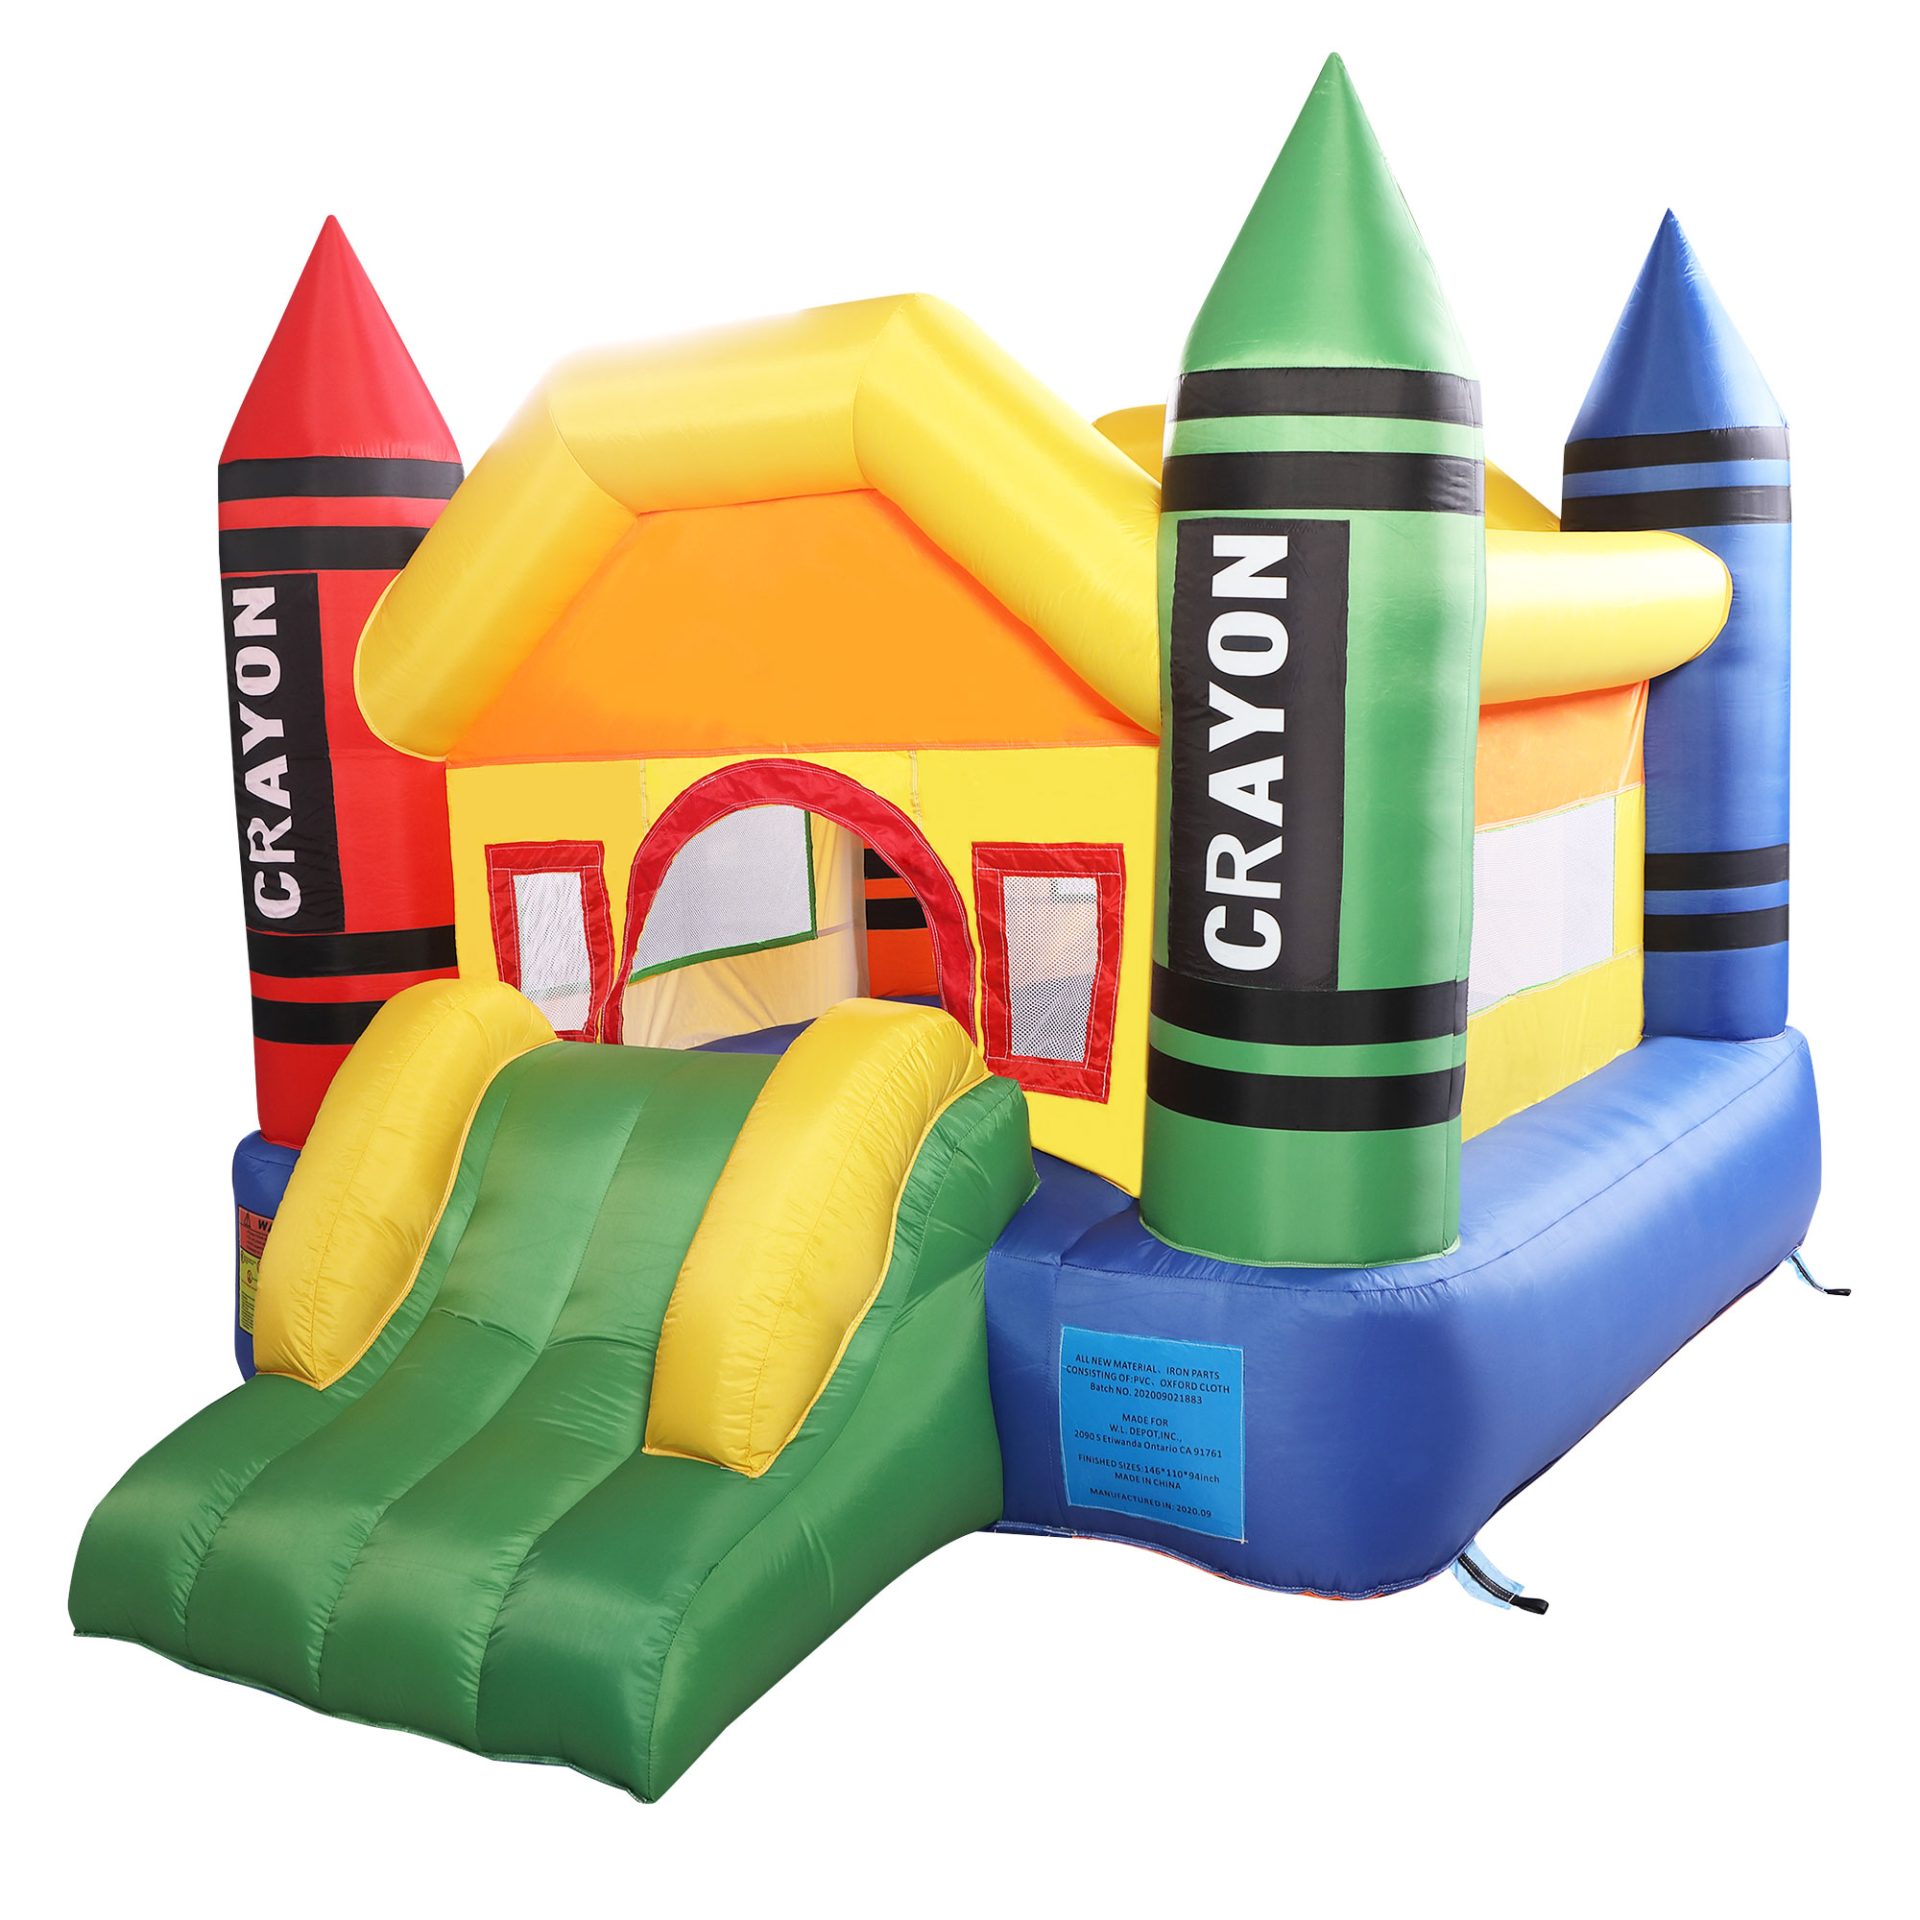 Nyeekoy Inflatable Bounce House, Kid Jump Castle Bouncer with Slide and Mesh Wall, Including Carry Bag, Repair Kit, Stake, for Children 3-10 TH17G0161 4